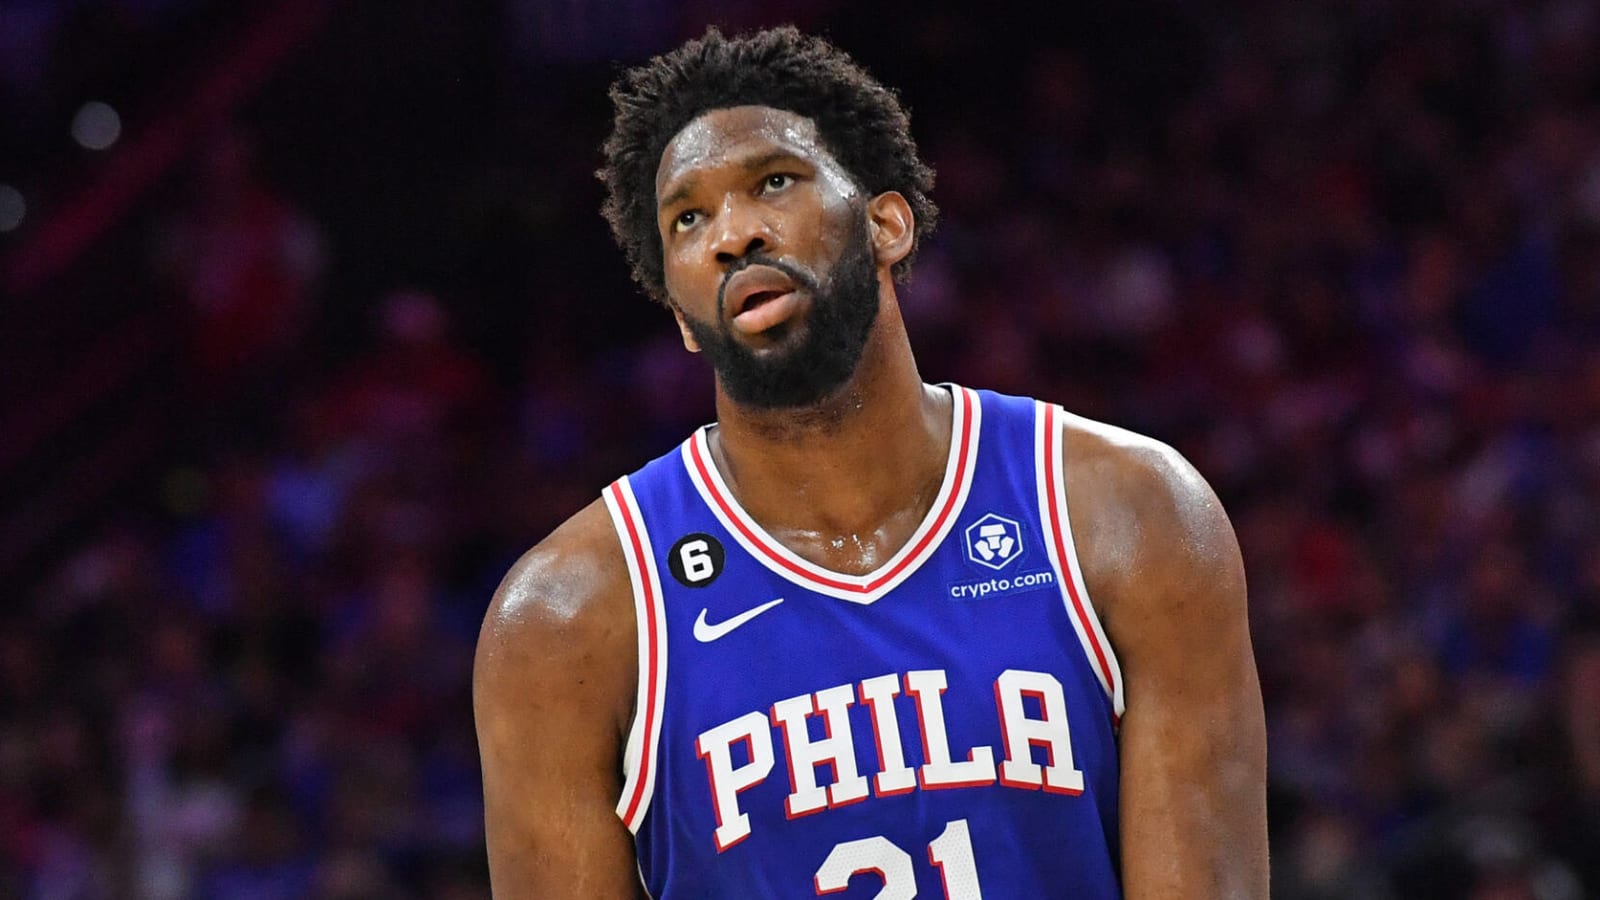 Joel Embiid sparks frenzy among 76ers fans on social media